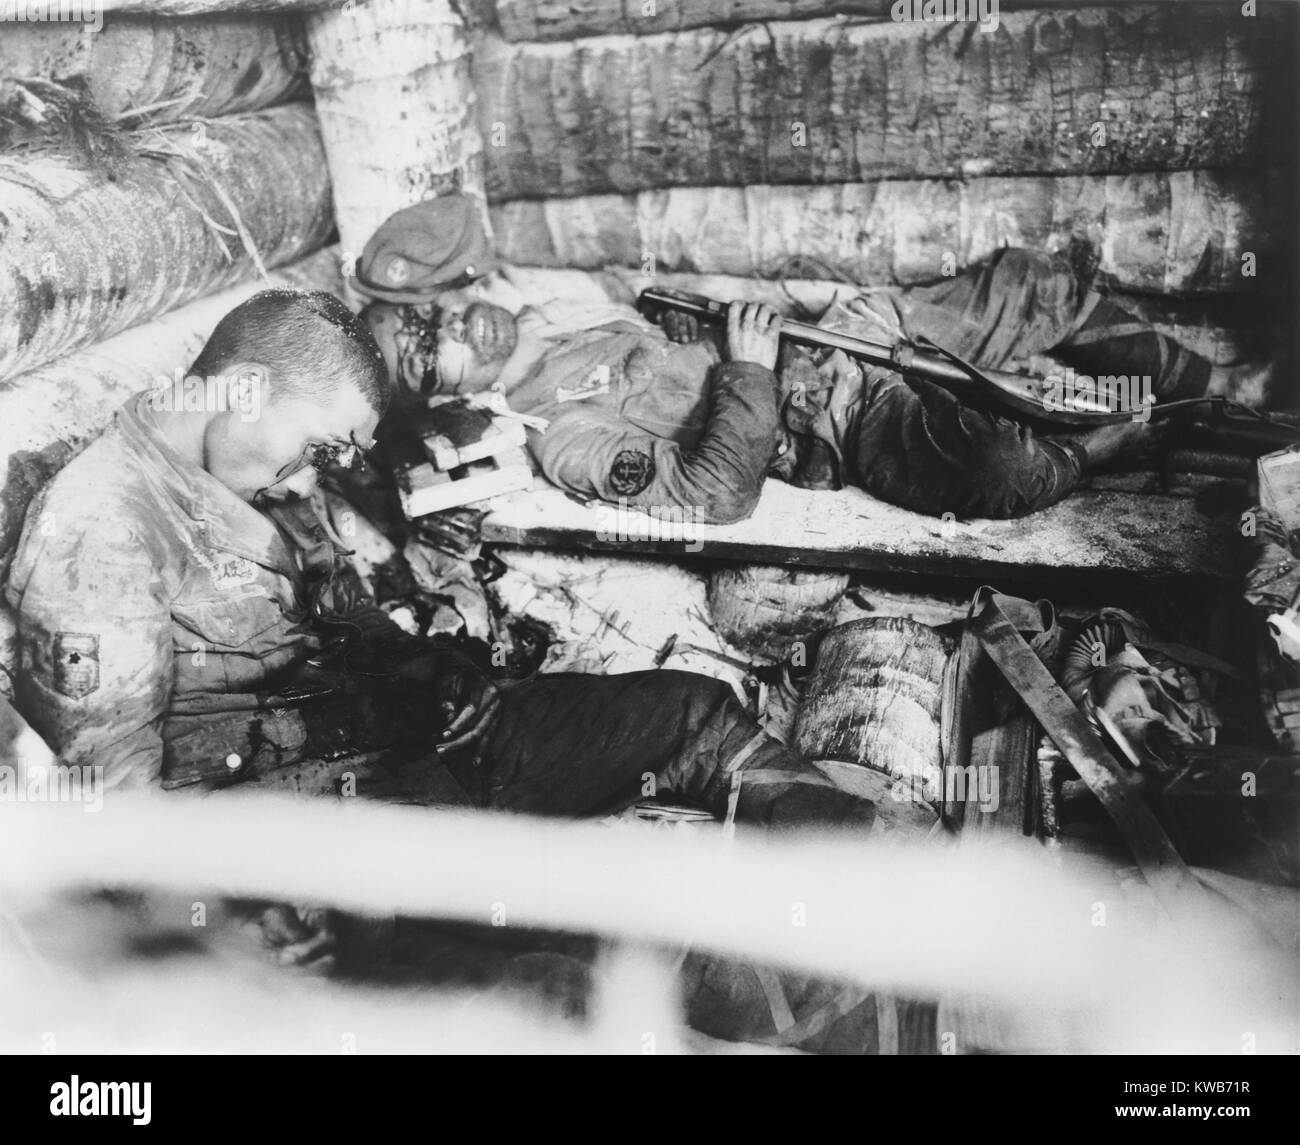 Two Japanese Imperial Marines who shot themselves rather than surrender to U.S. Marines. Nov. 20-23, 1943, Tarawa, Gilbert Islands. World War 2. (BSLOC 2014 10 102) Stock Photo